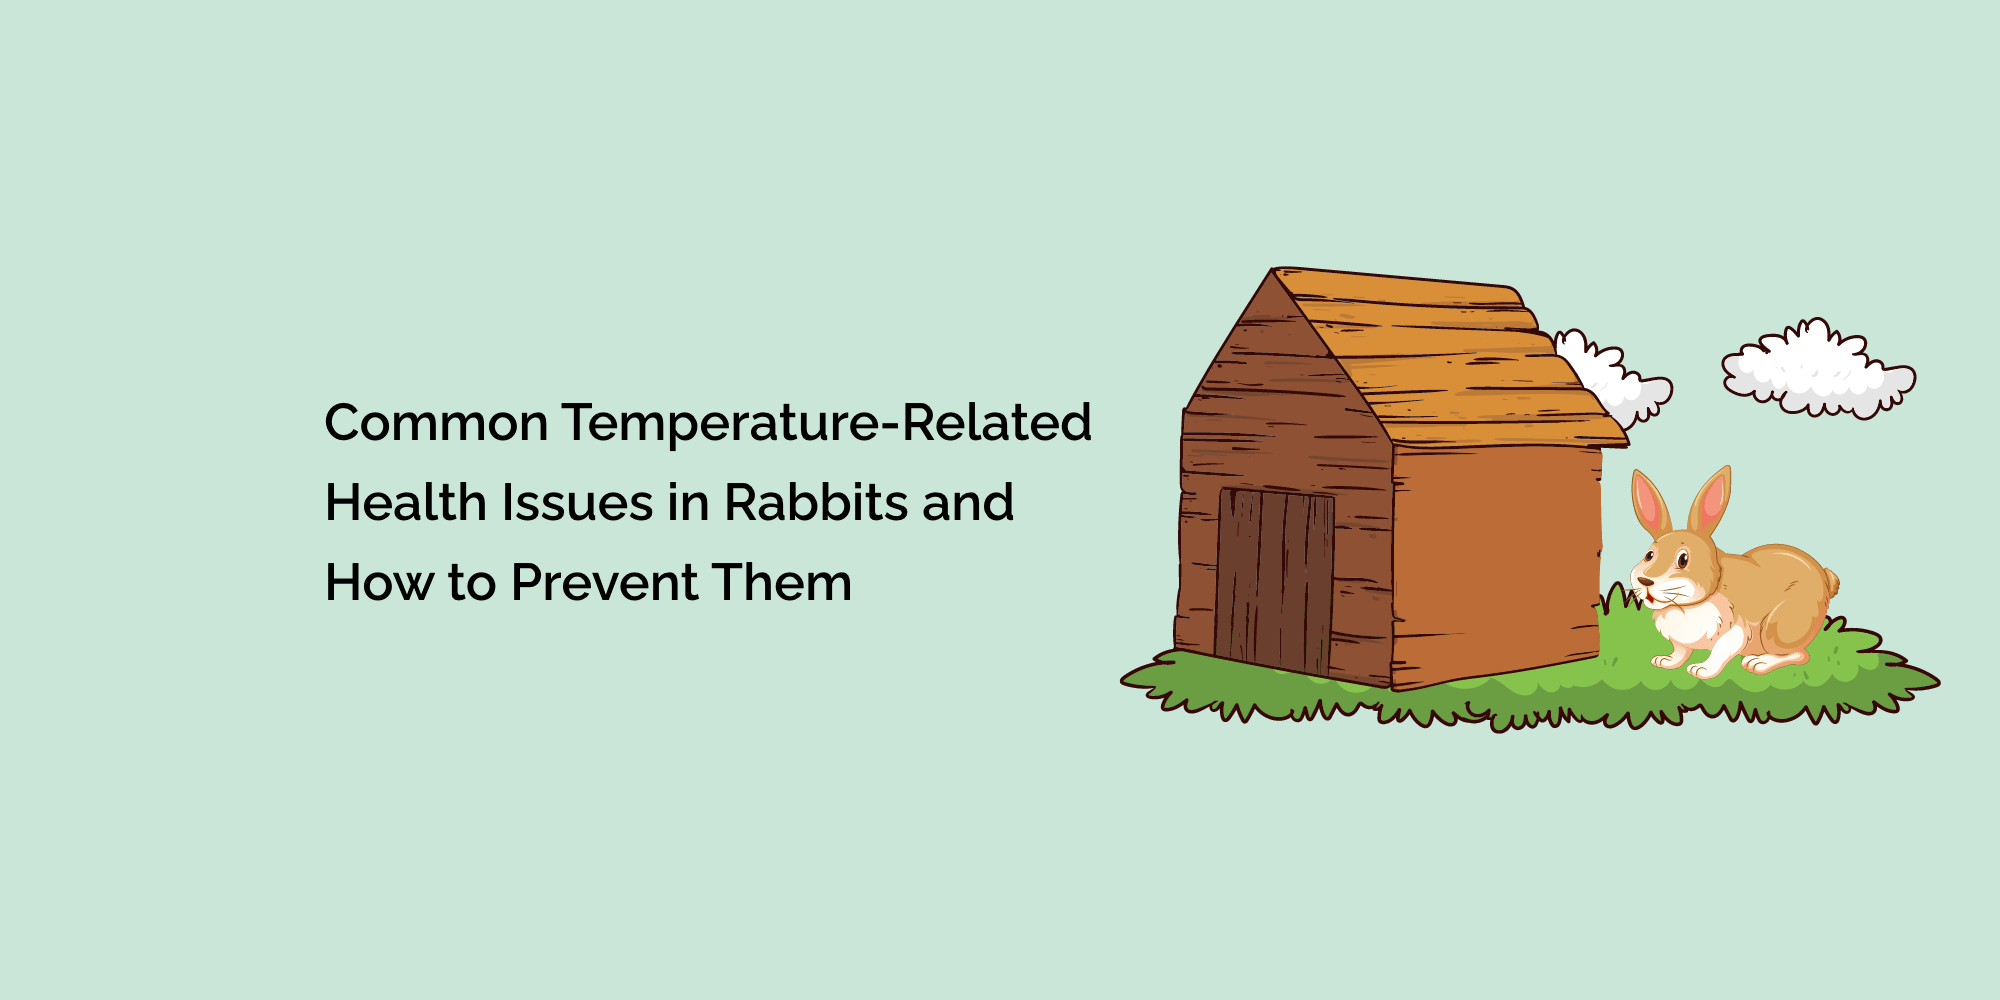 Common Temperature-Related Health Issues in Rabbits and How to Prevent Them